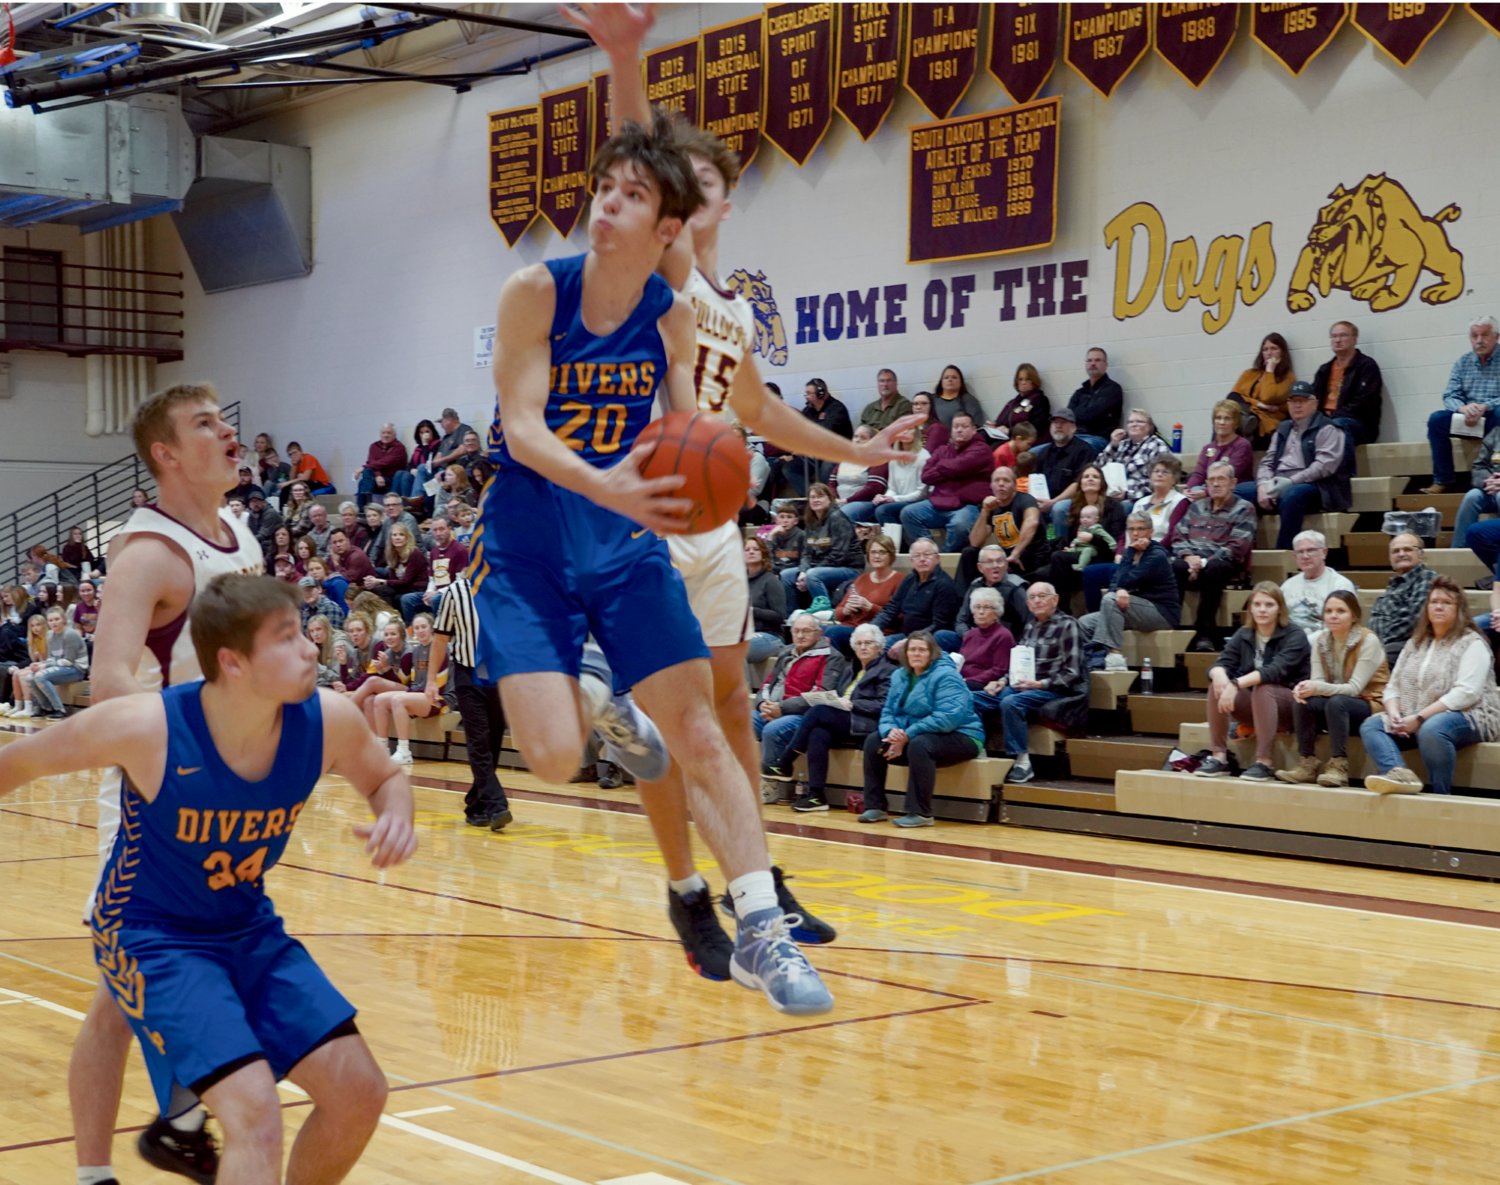 Lake Preston Diver Josh McMasters (20) goes airborne at Thursday night’s game against the De Smet Bulldogs in the Dog Pound. McMasters led the Divers in scoring with nine points.